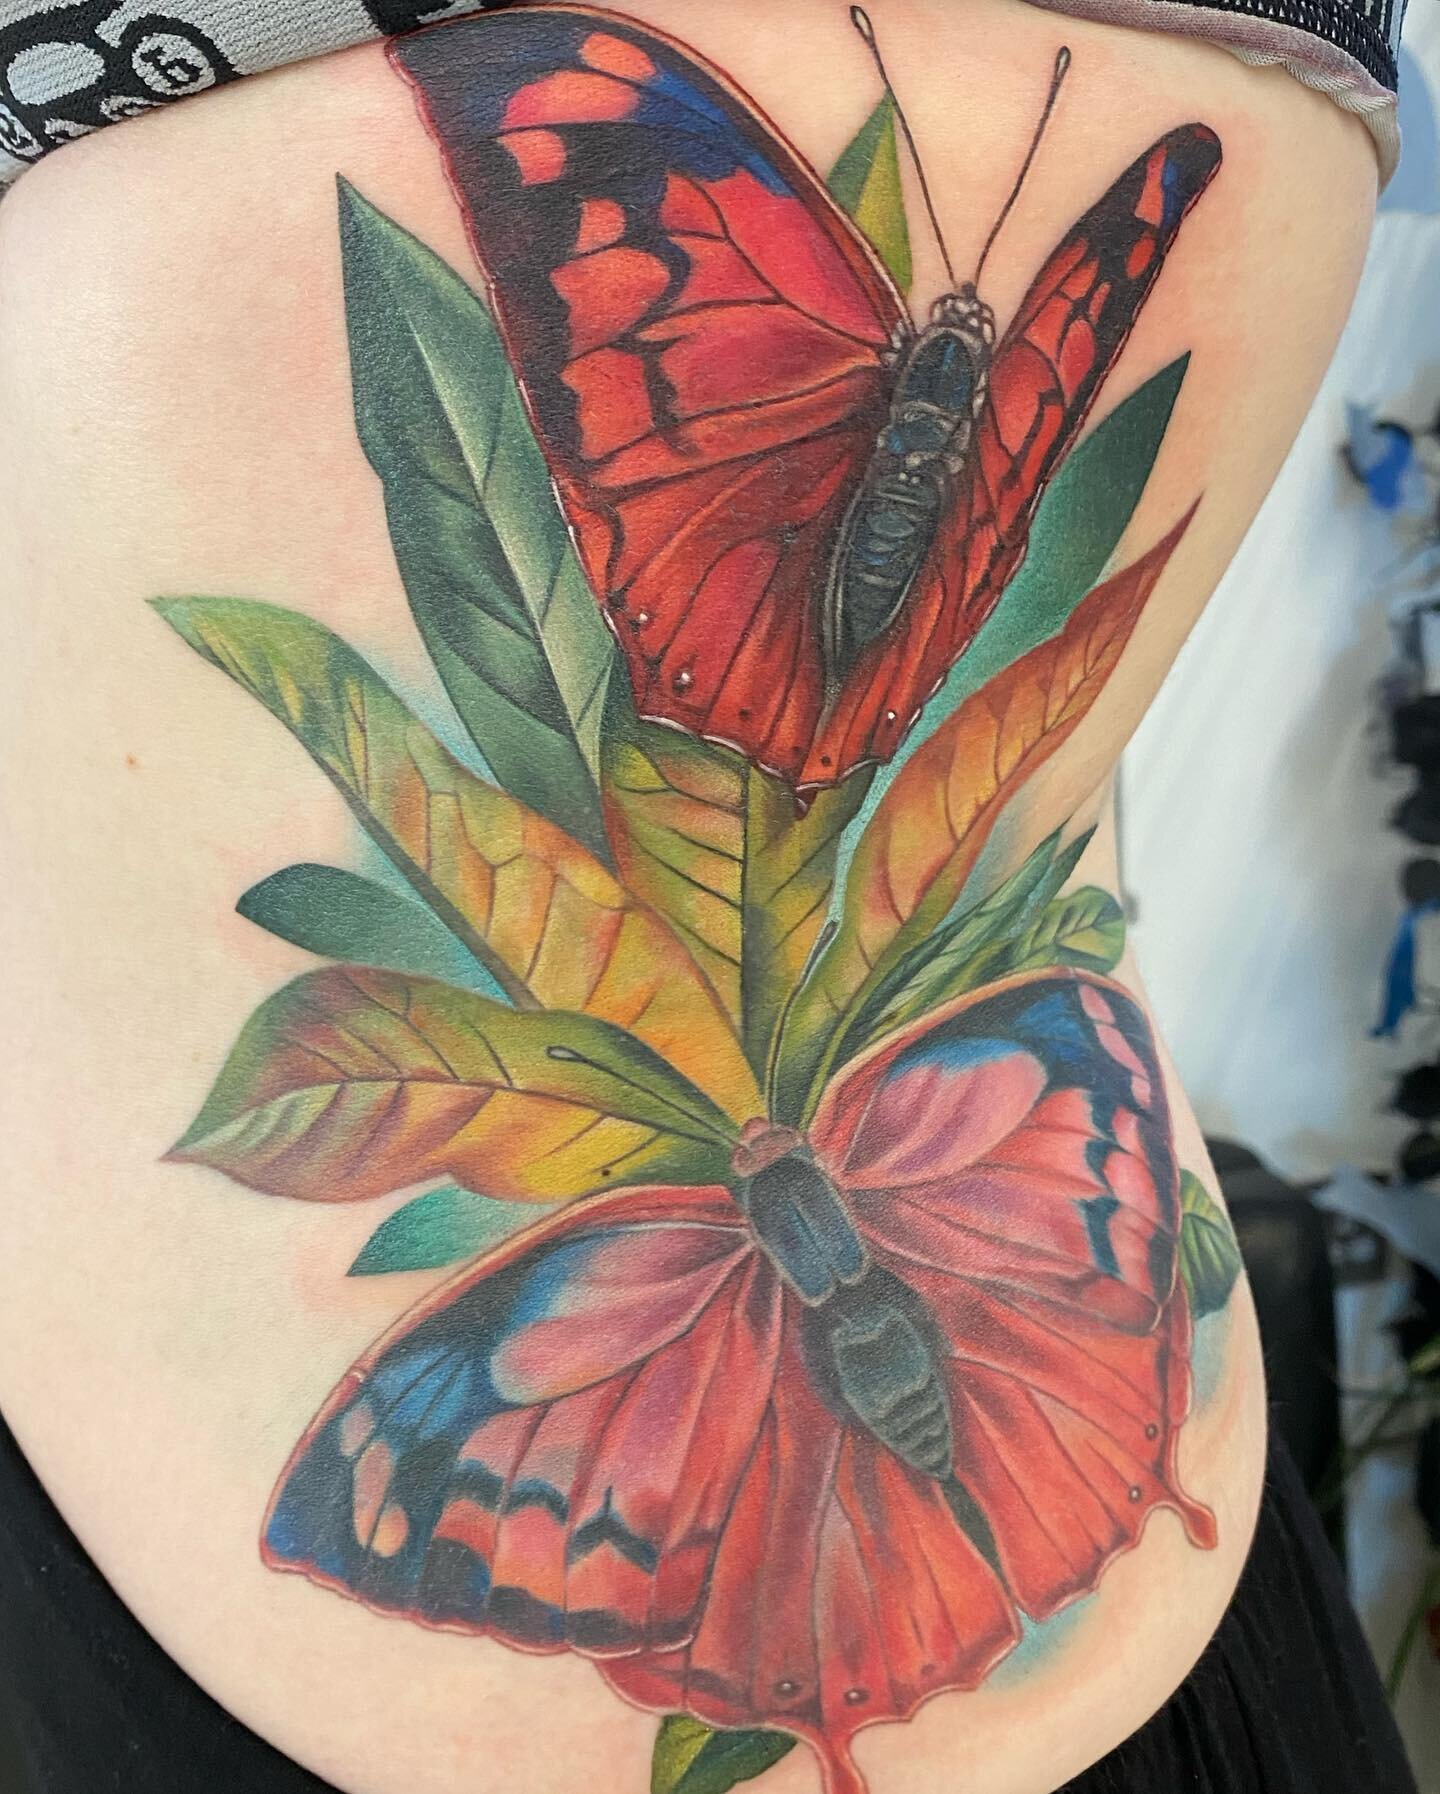 Thanks Rachel 😊
A huge laser cover up and part healed part fresh, based on a drawing I did a couple of years back. We finished this in the summer. Rachel is one of the toughest people I tattoo! 
Made with @fusion_ink and @killerinktattoo supplies, @